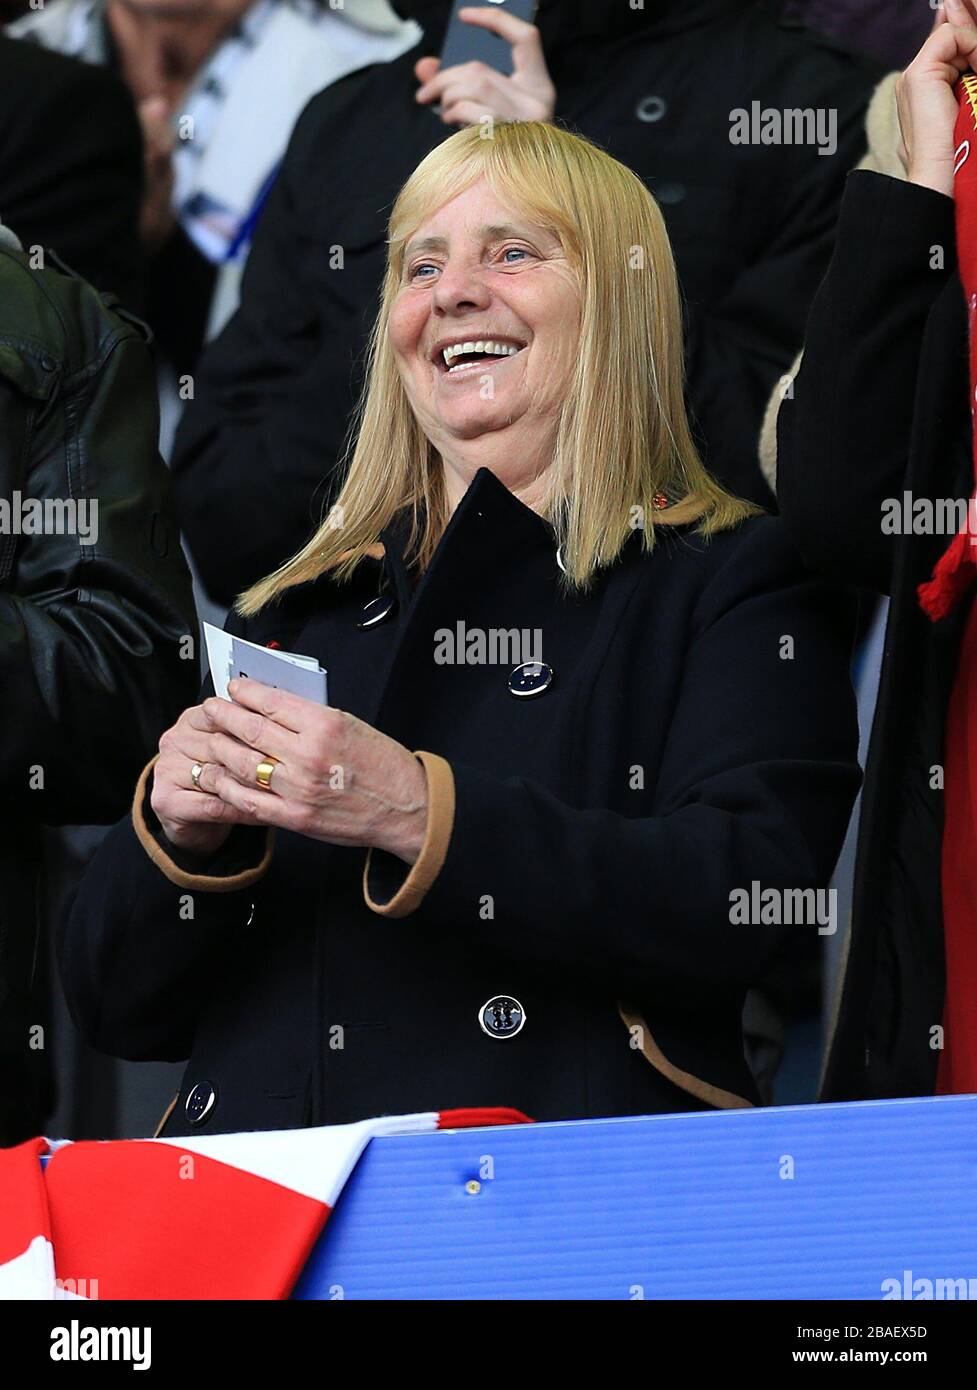 Hillsborough Families Support Group member Margaret Aspinall in the stands Stock Photo